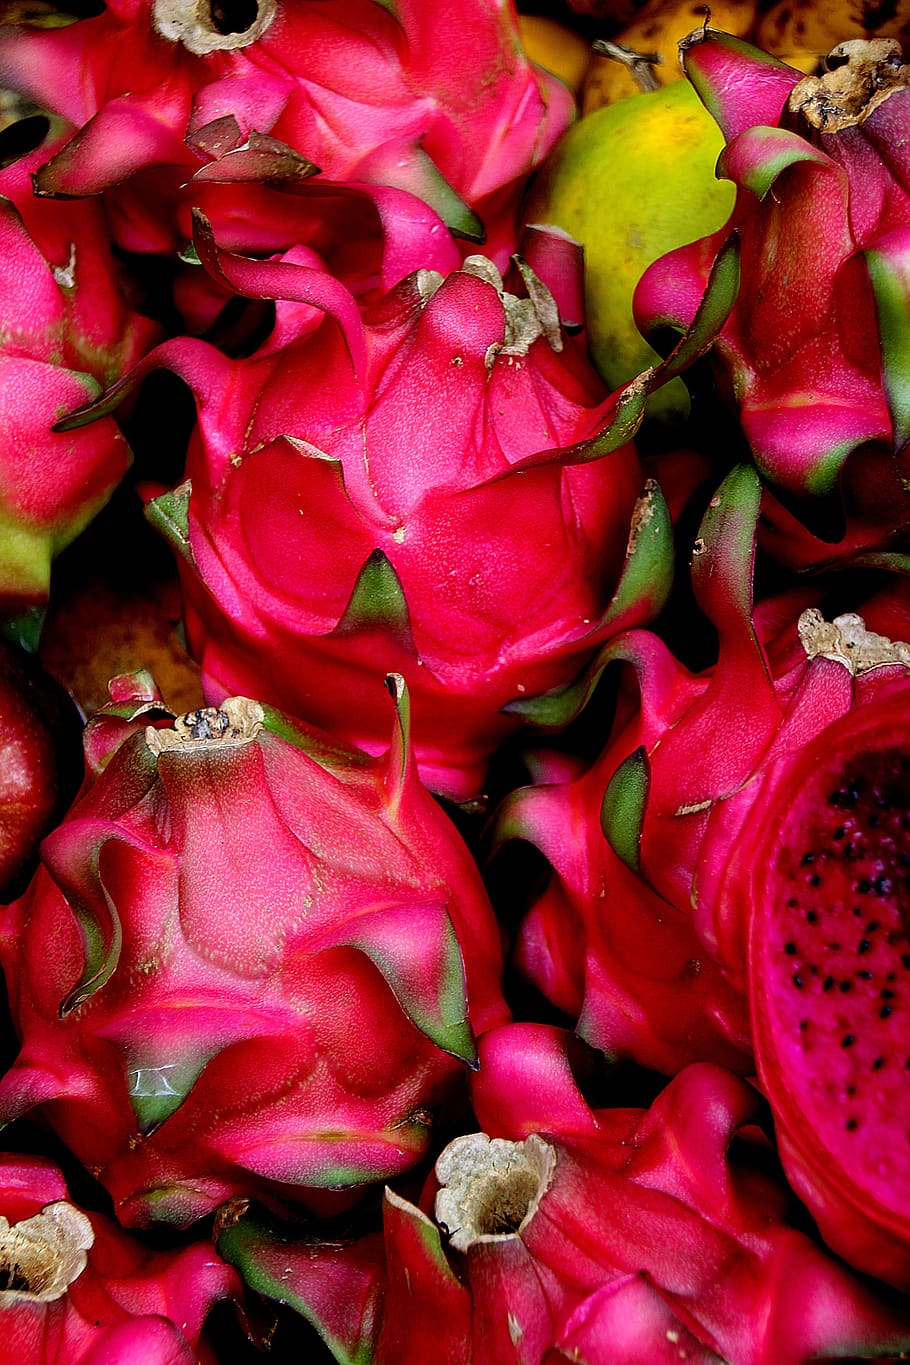 bali, red fruits, exotic fruits, colorful, culinary, dragonfruit